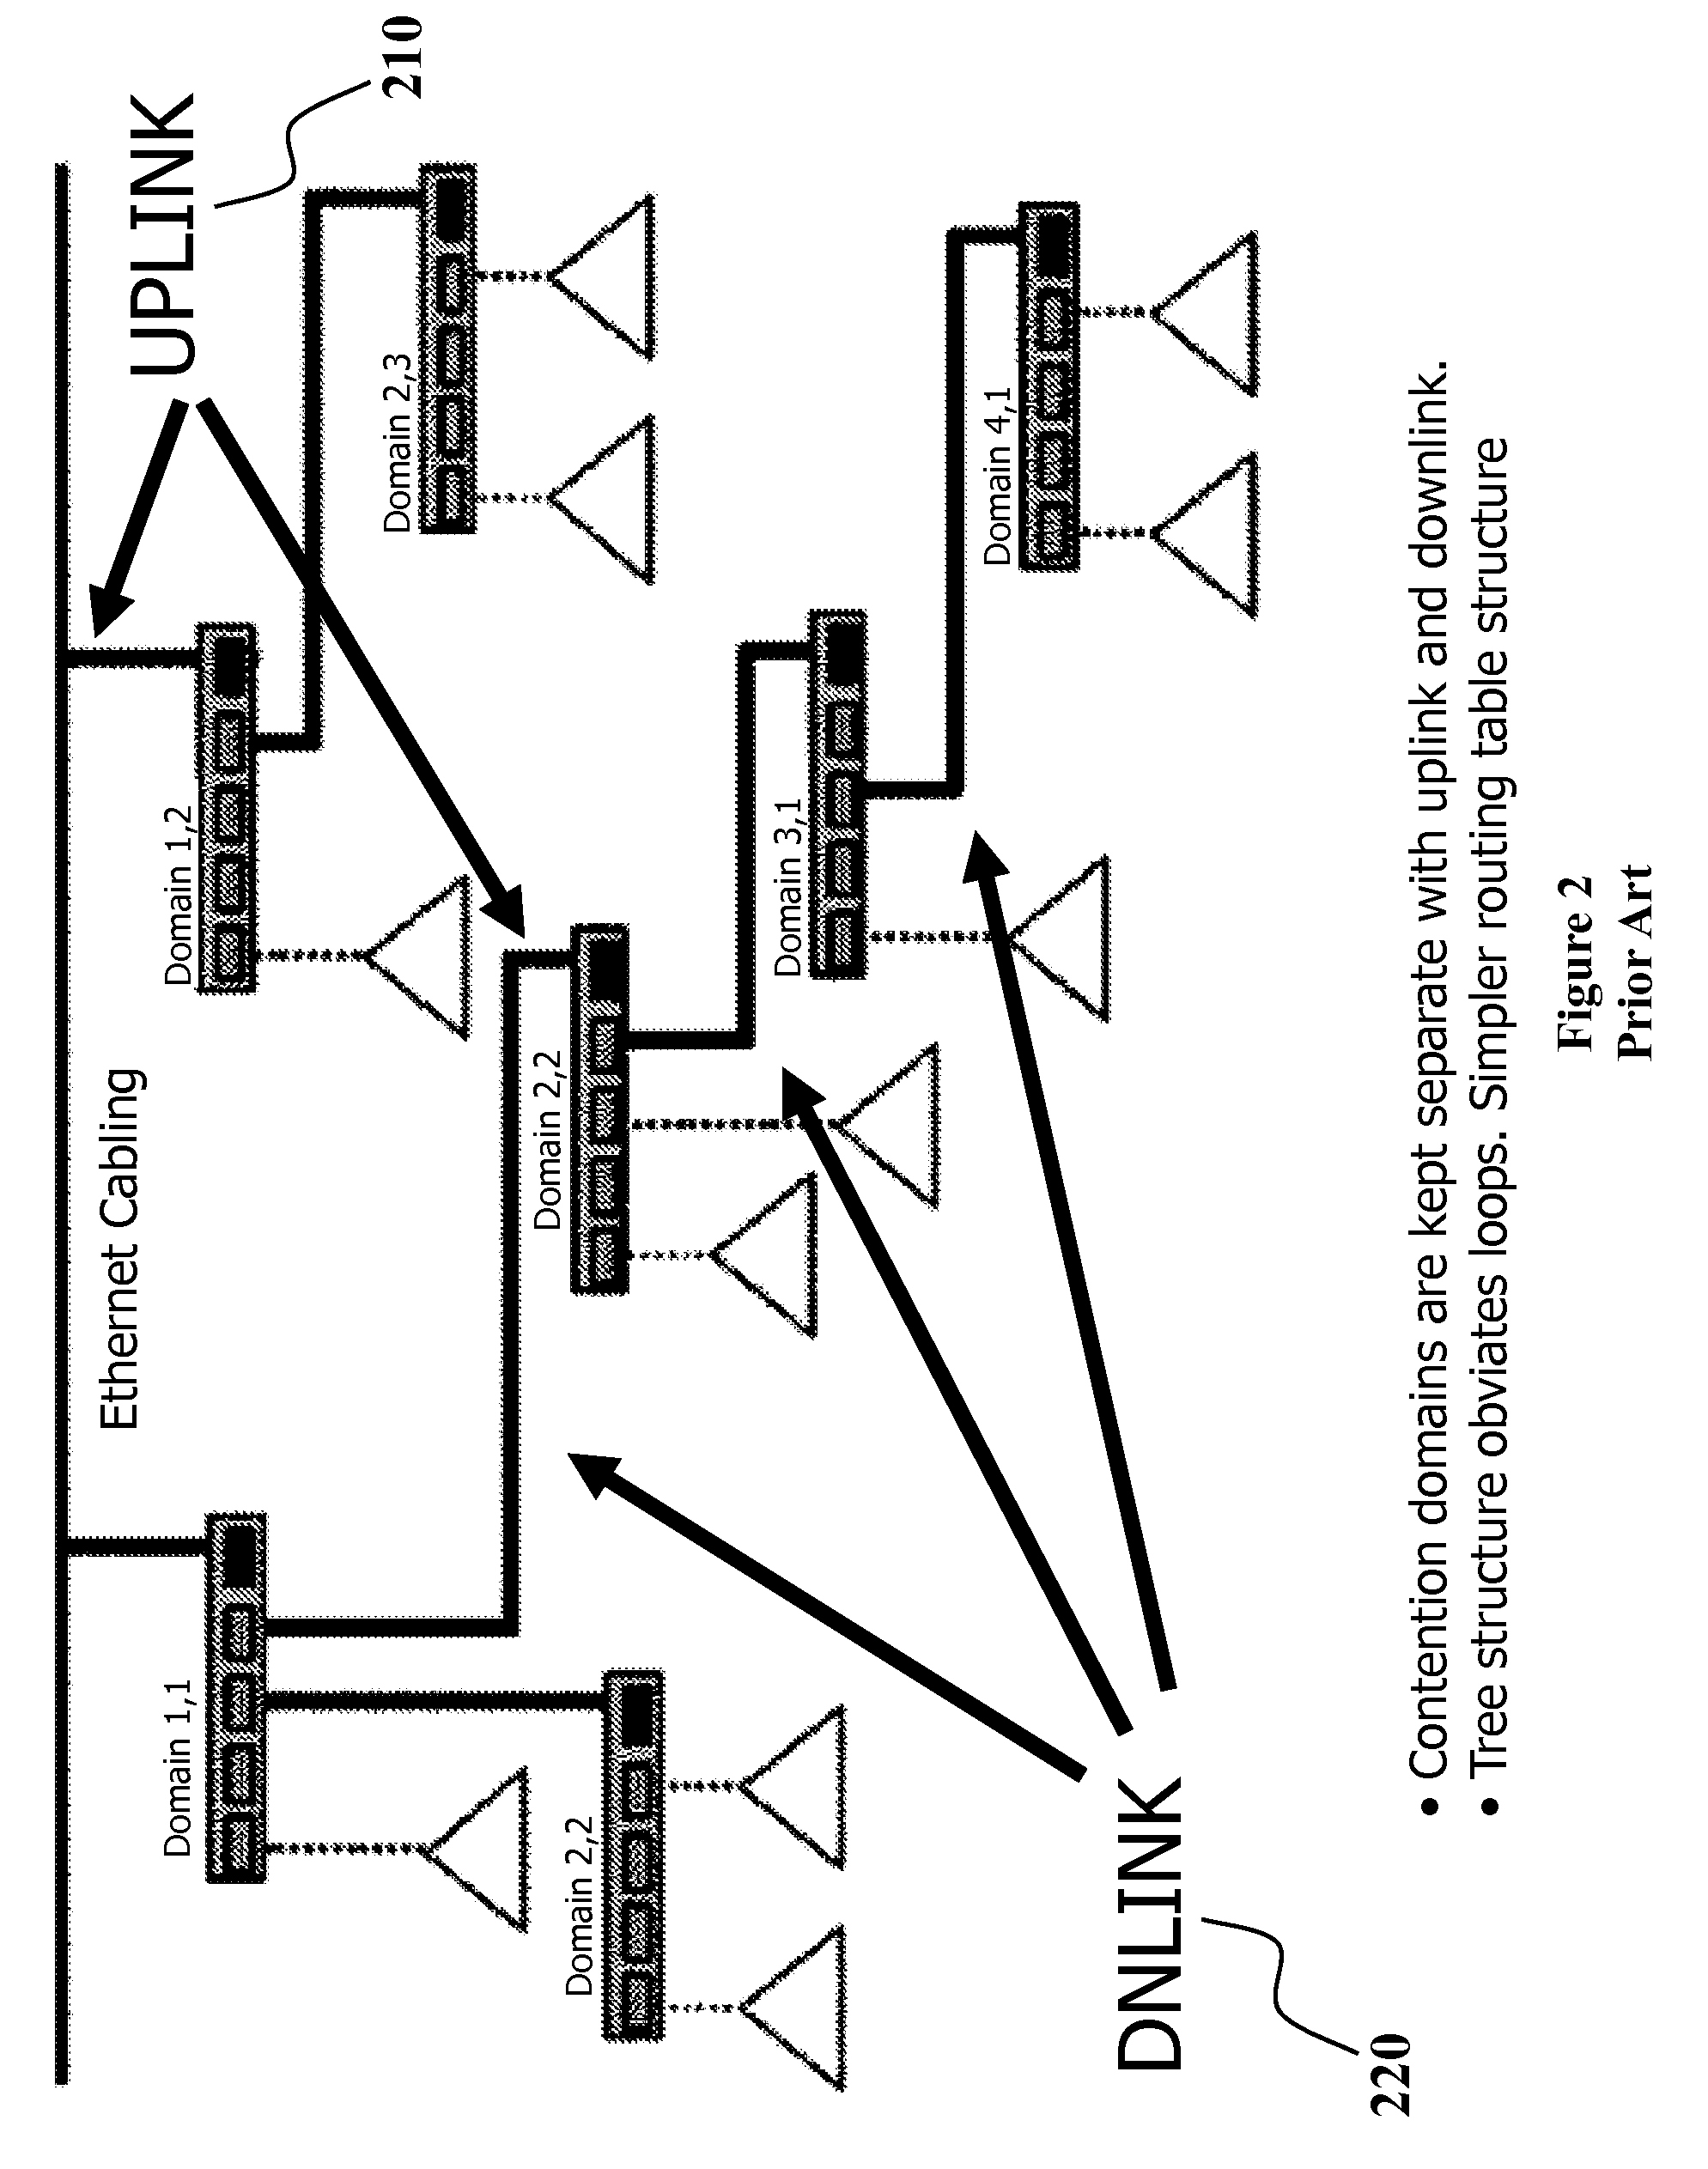 Persistent Mesh for Isolated Mobile and Temporal Networking